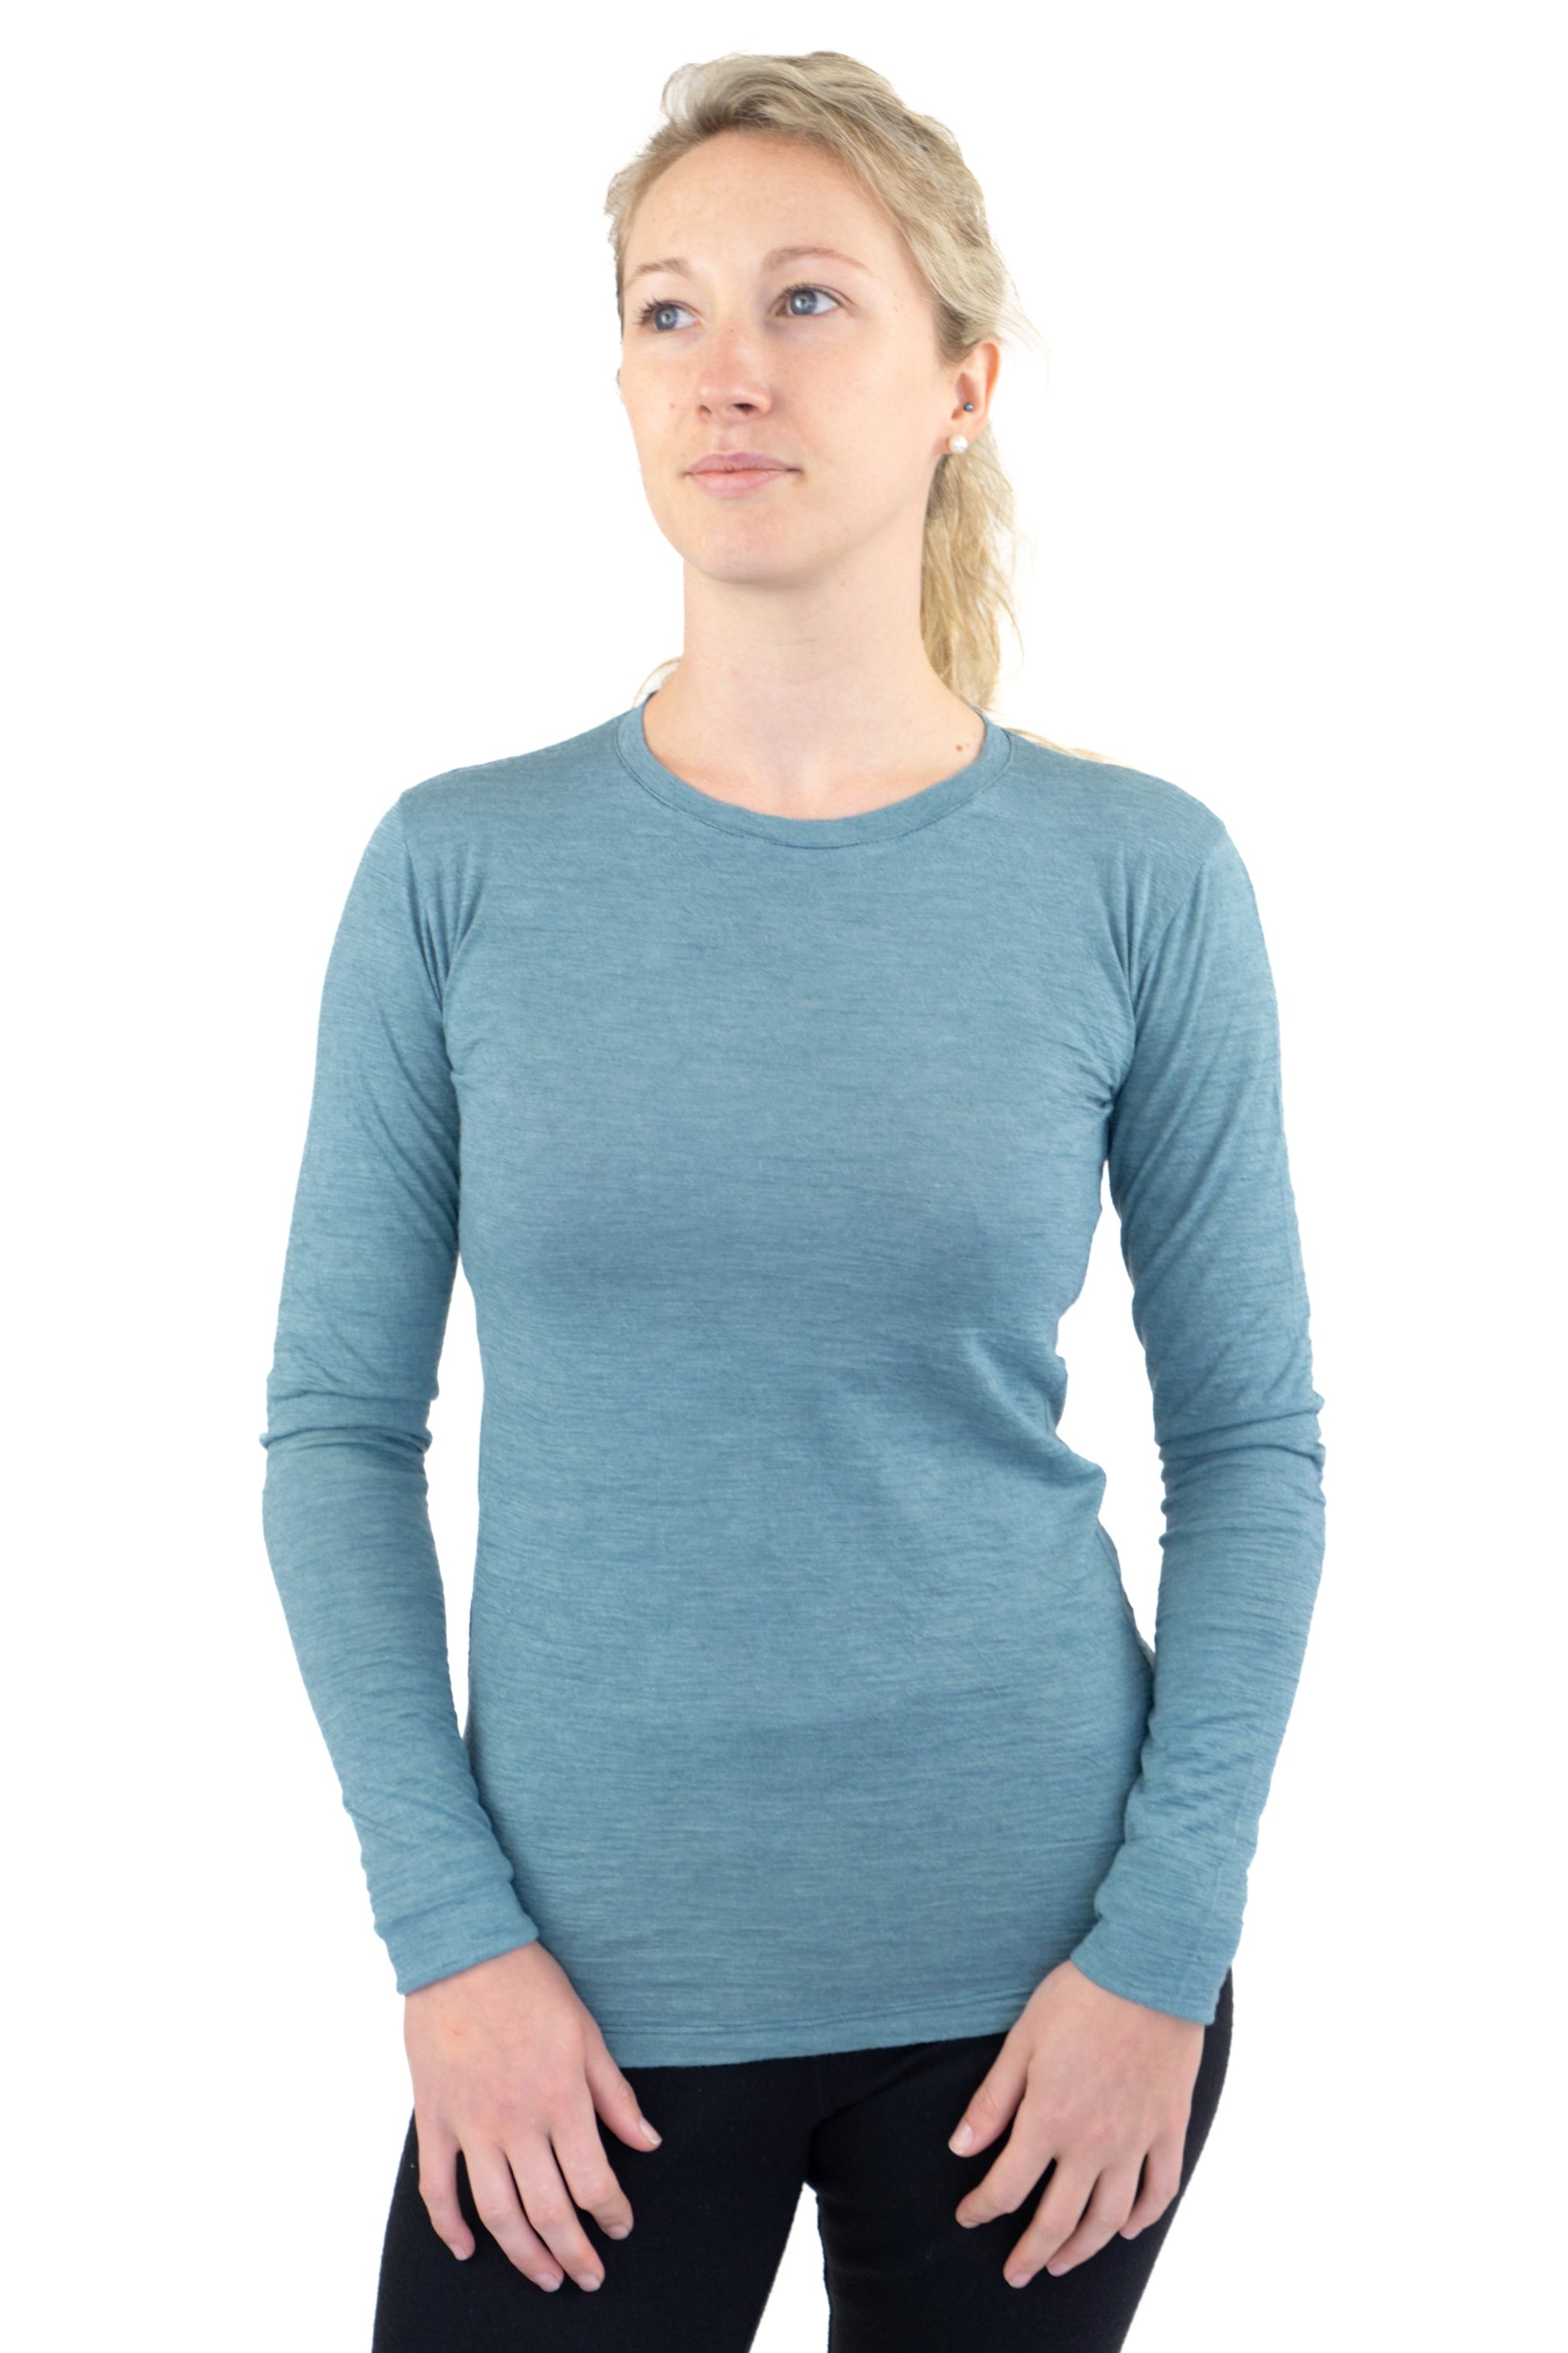 Women's Alpaca Wool Long Sleeve Base Layer: 110 Ultralight color Natural Turquoise